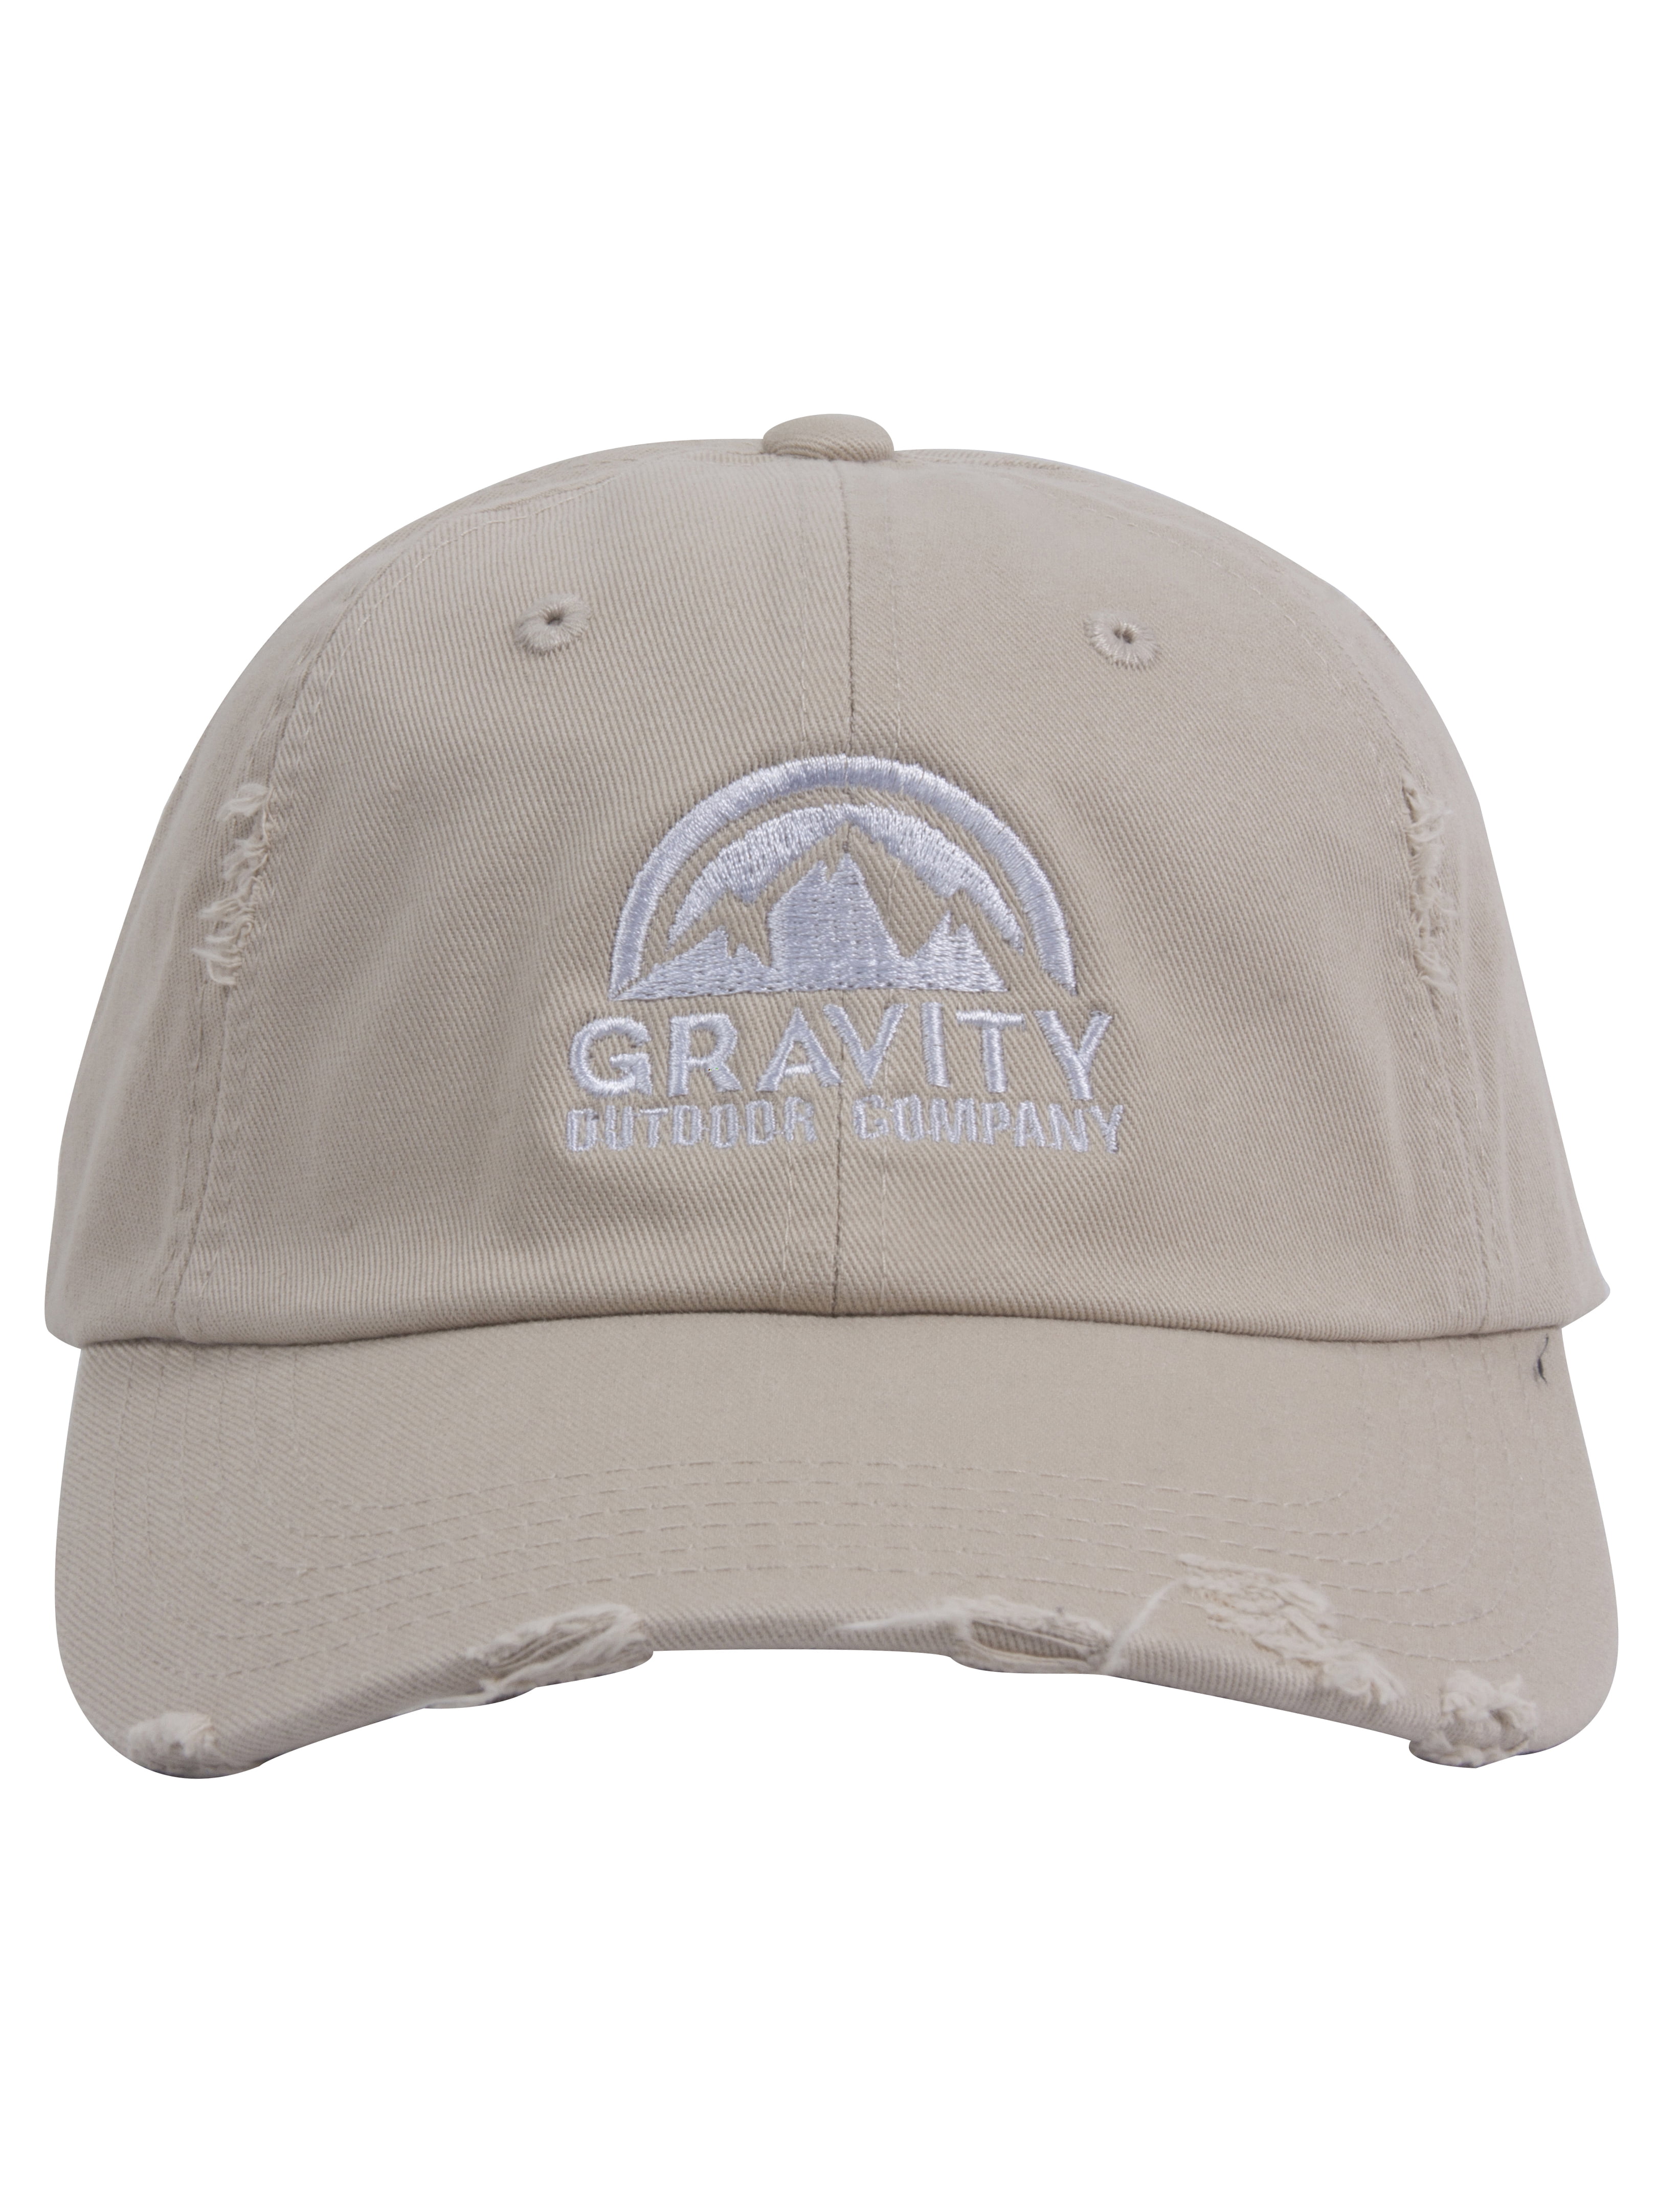 Gravity Outdoor Co. Distressed Adjustable Baseball Cap - Stone